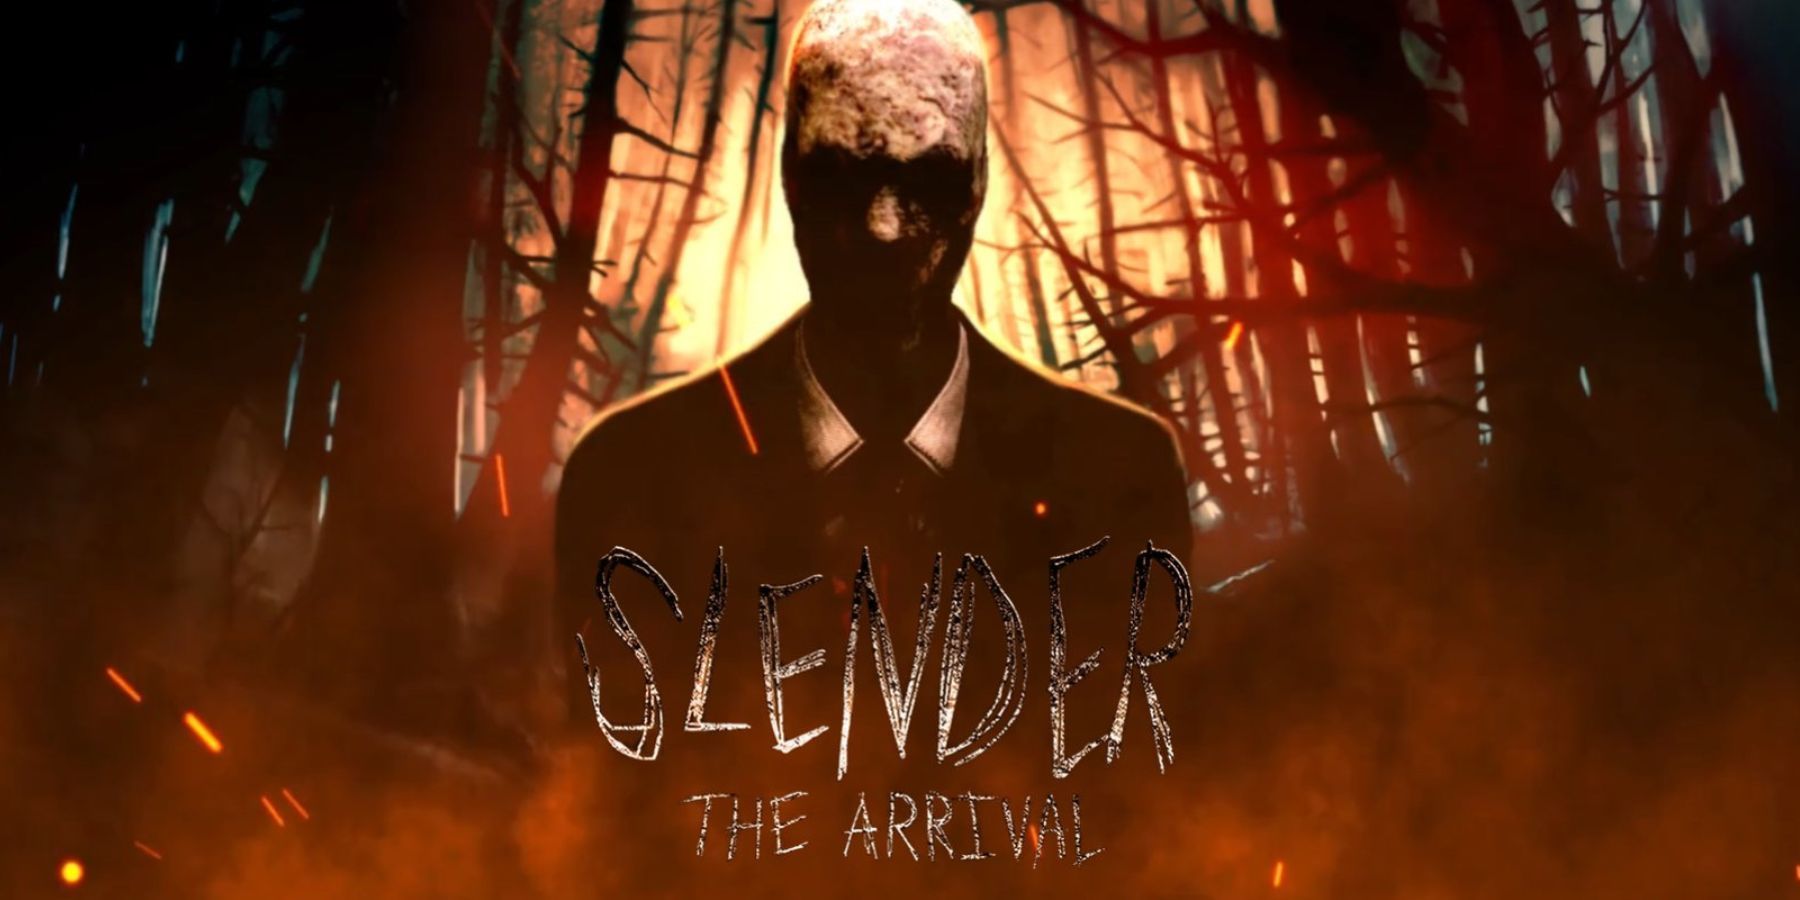 Slender the arrival 10 year anniversary update cover art